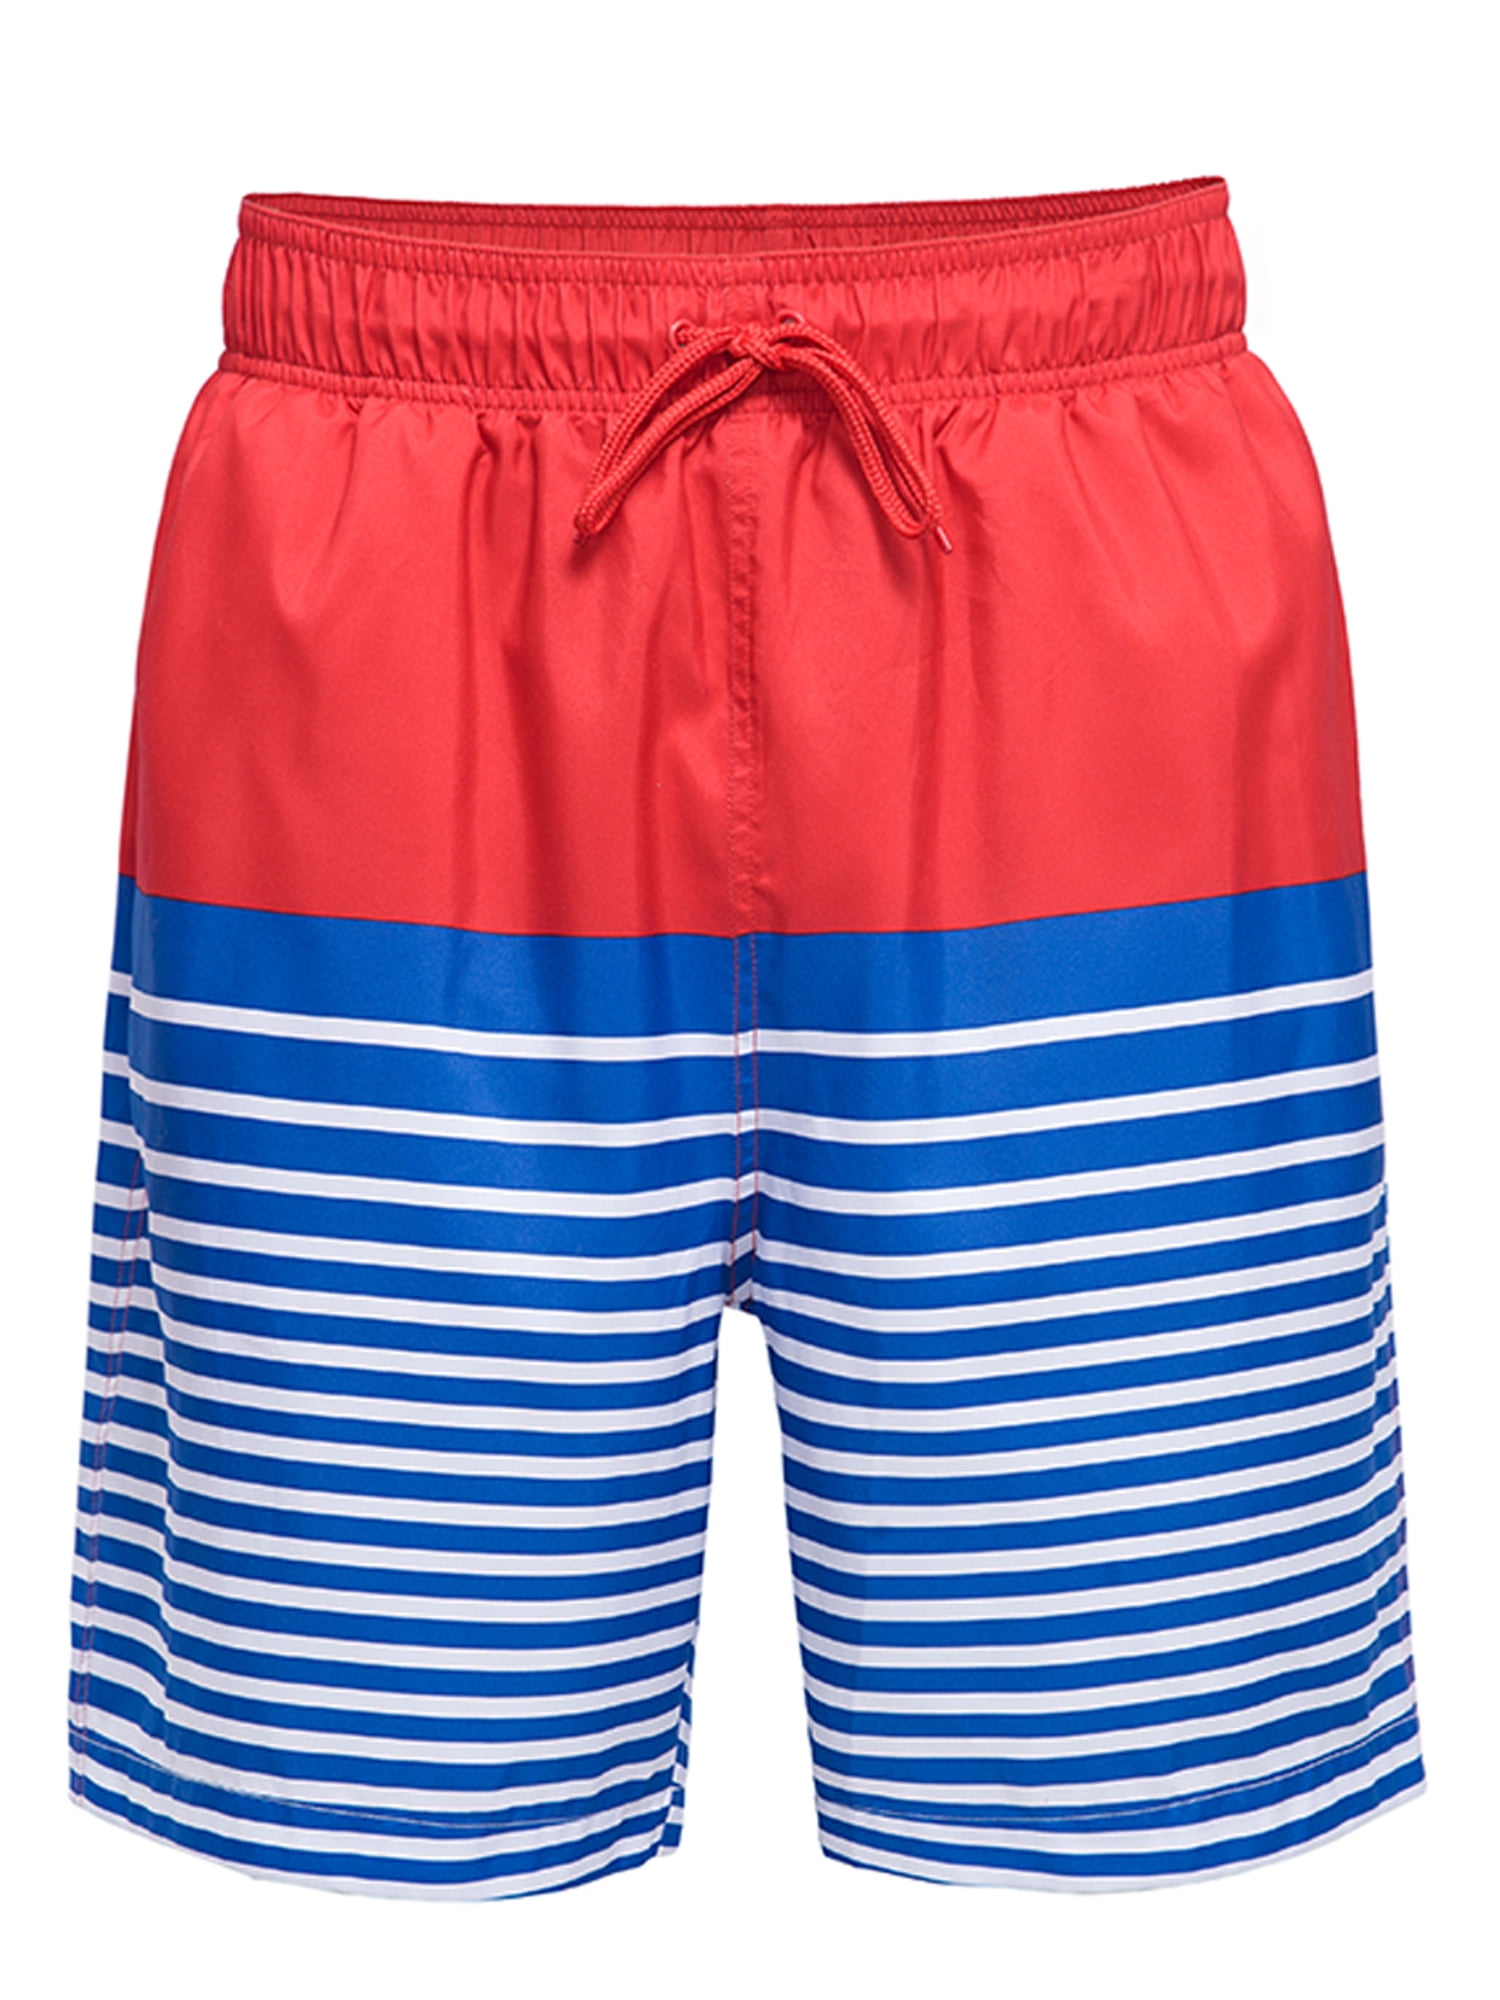 Mens Swim Trunks Cute Sailor Cat Quick Dry Beach Board Shorts with Mesh Lining